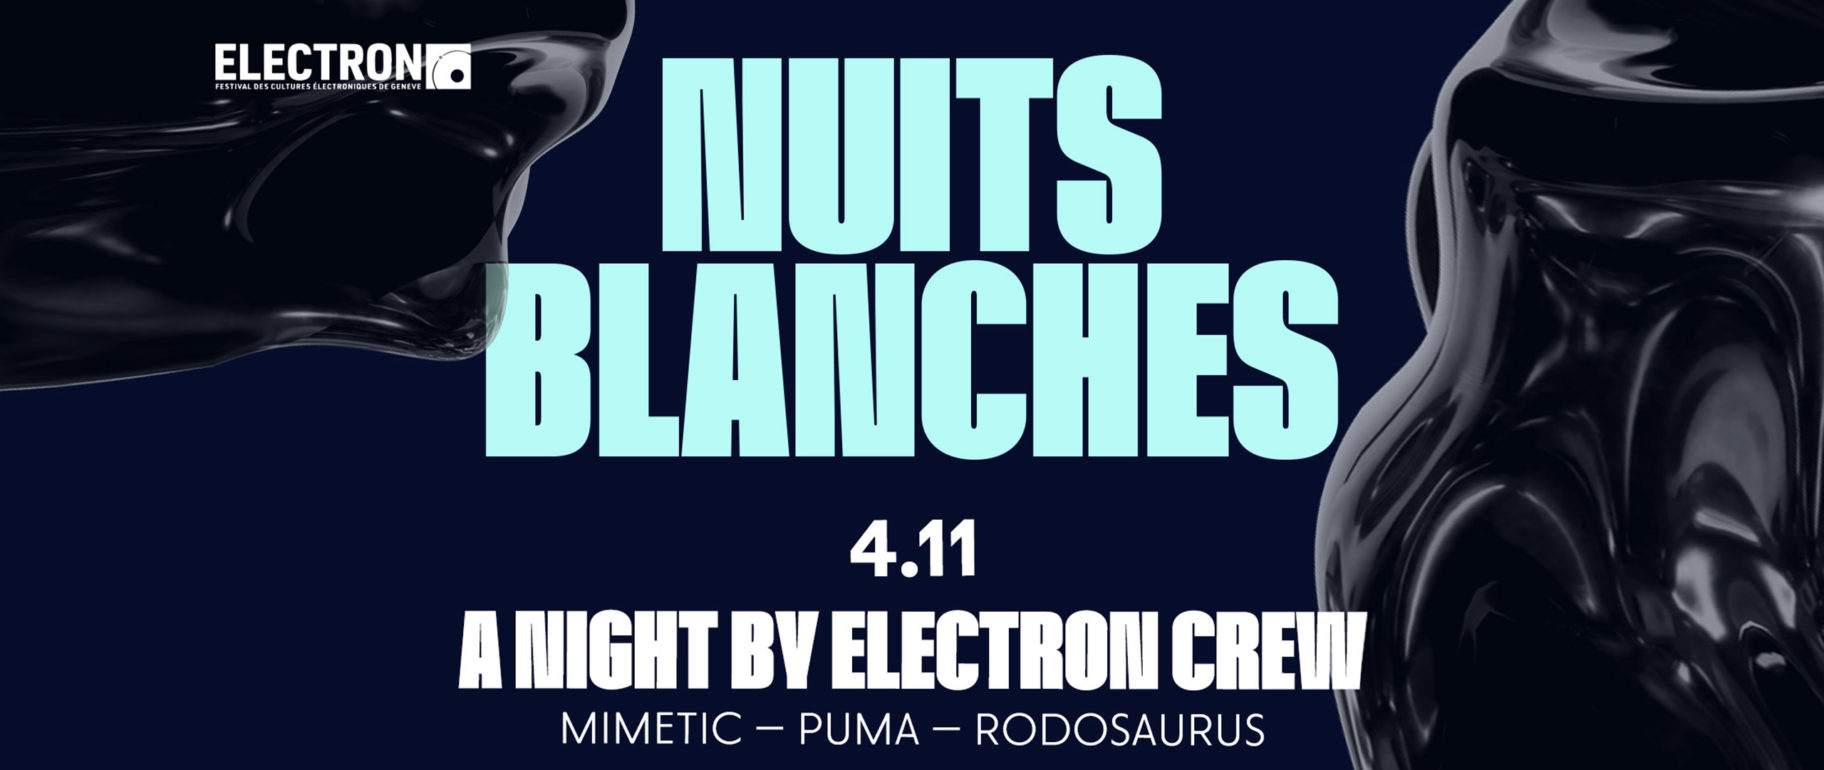 Nuits Blanches - A NIGHT BY ELECTRON CREW - Página frontal